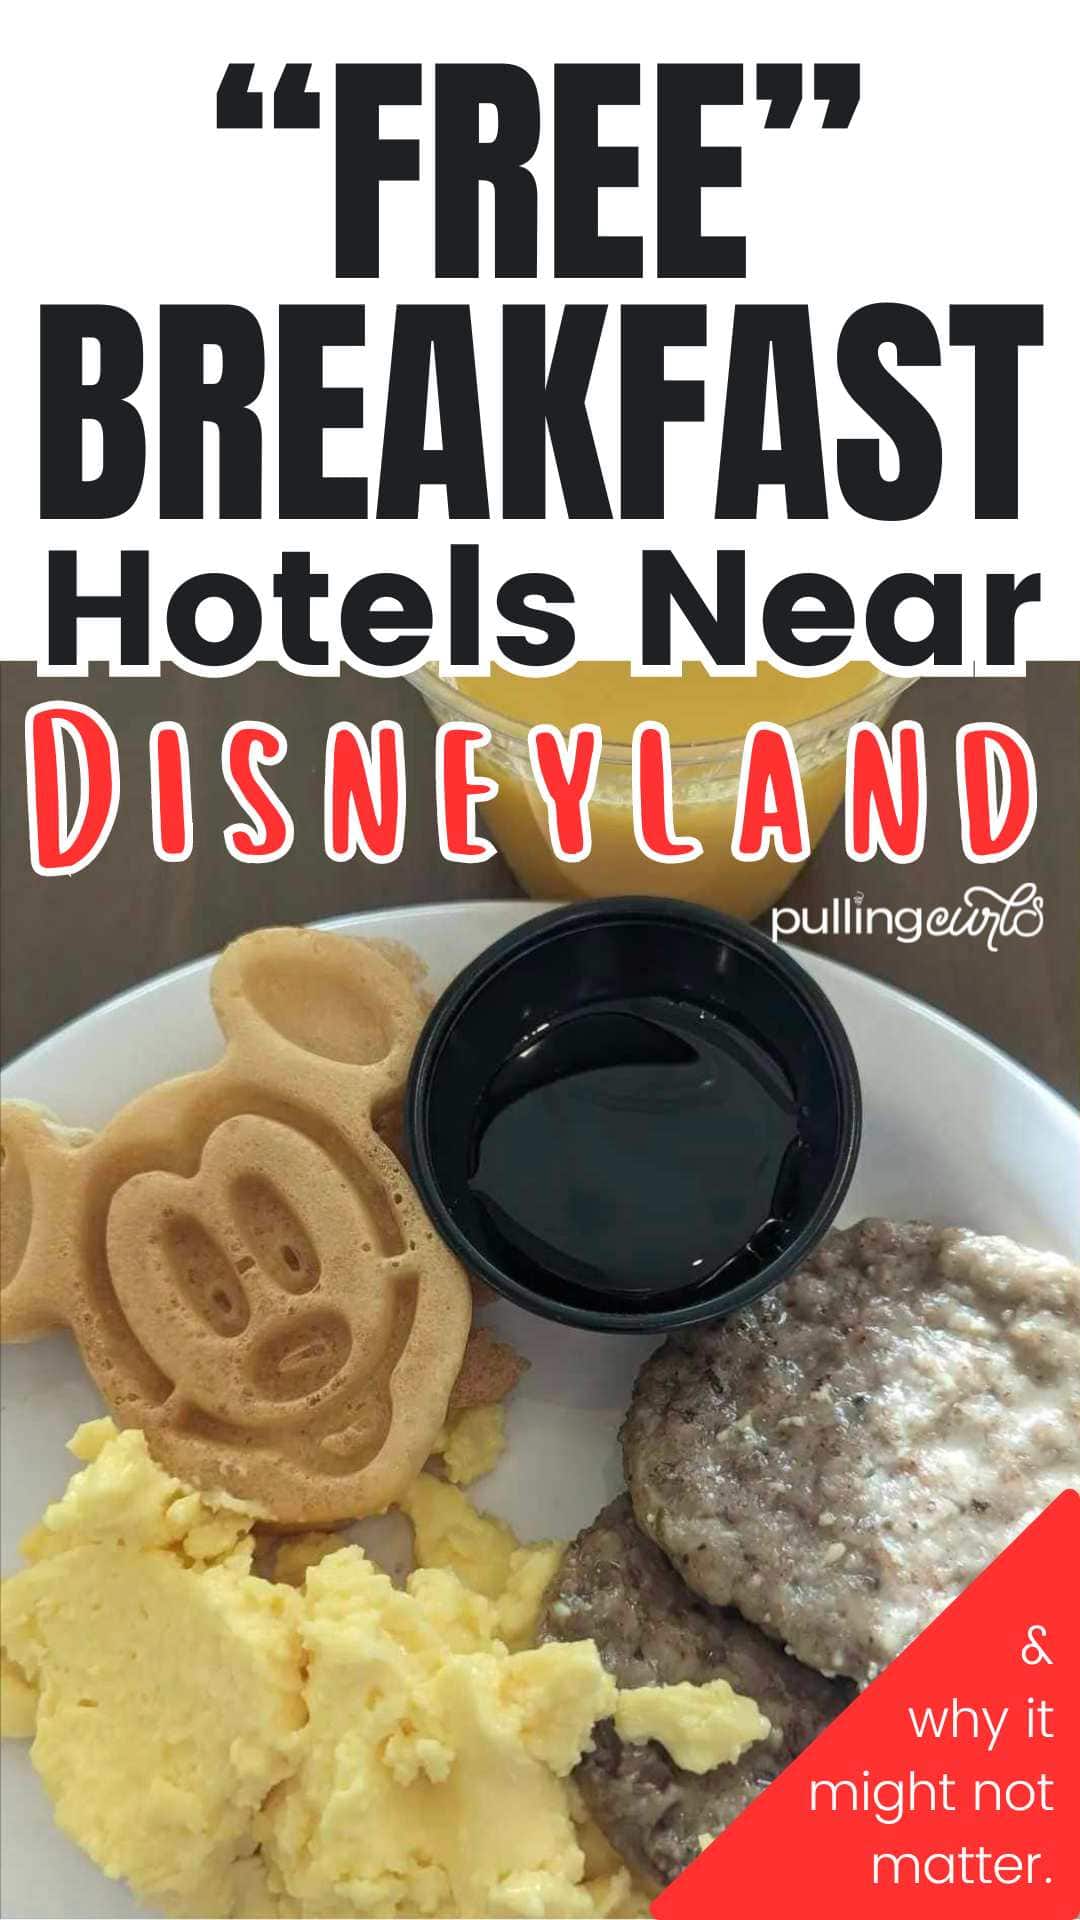 Start your Disneyland adventure right with a complimentary breakfast! Explore hotels near Disneyland offering free breakfast options to fuel your family's fun-filled day. From continental classics to hearty spreads, enjoy convenience and savings as you make memories in the happiest place on earth! #DisneylandHotels Disneyland hotels Free breakfast Family travel Disney magic Disneyland vacation Complimentary breakfast Disneyland accommodations Breakfast included Hotel deals Theme park stays via @pullingcurls